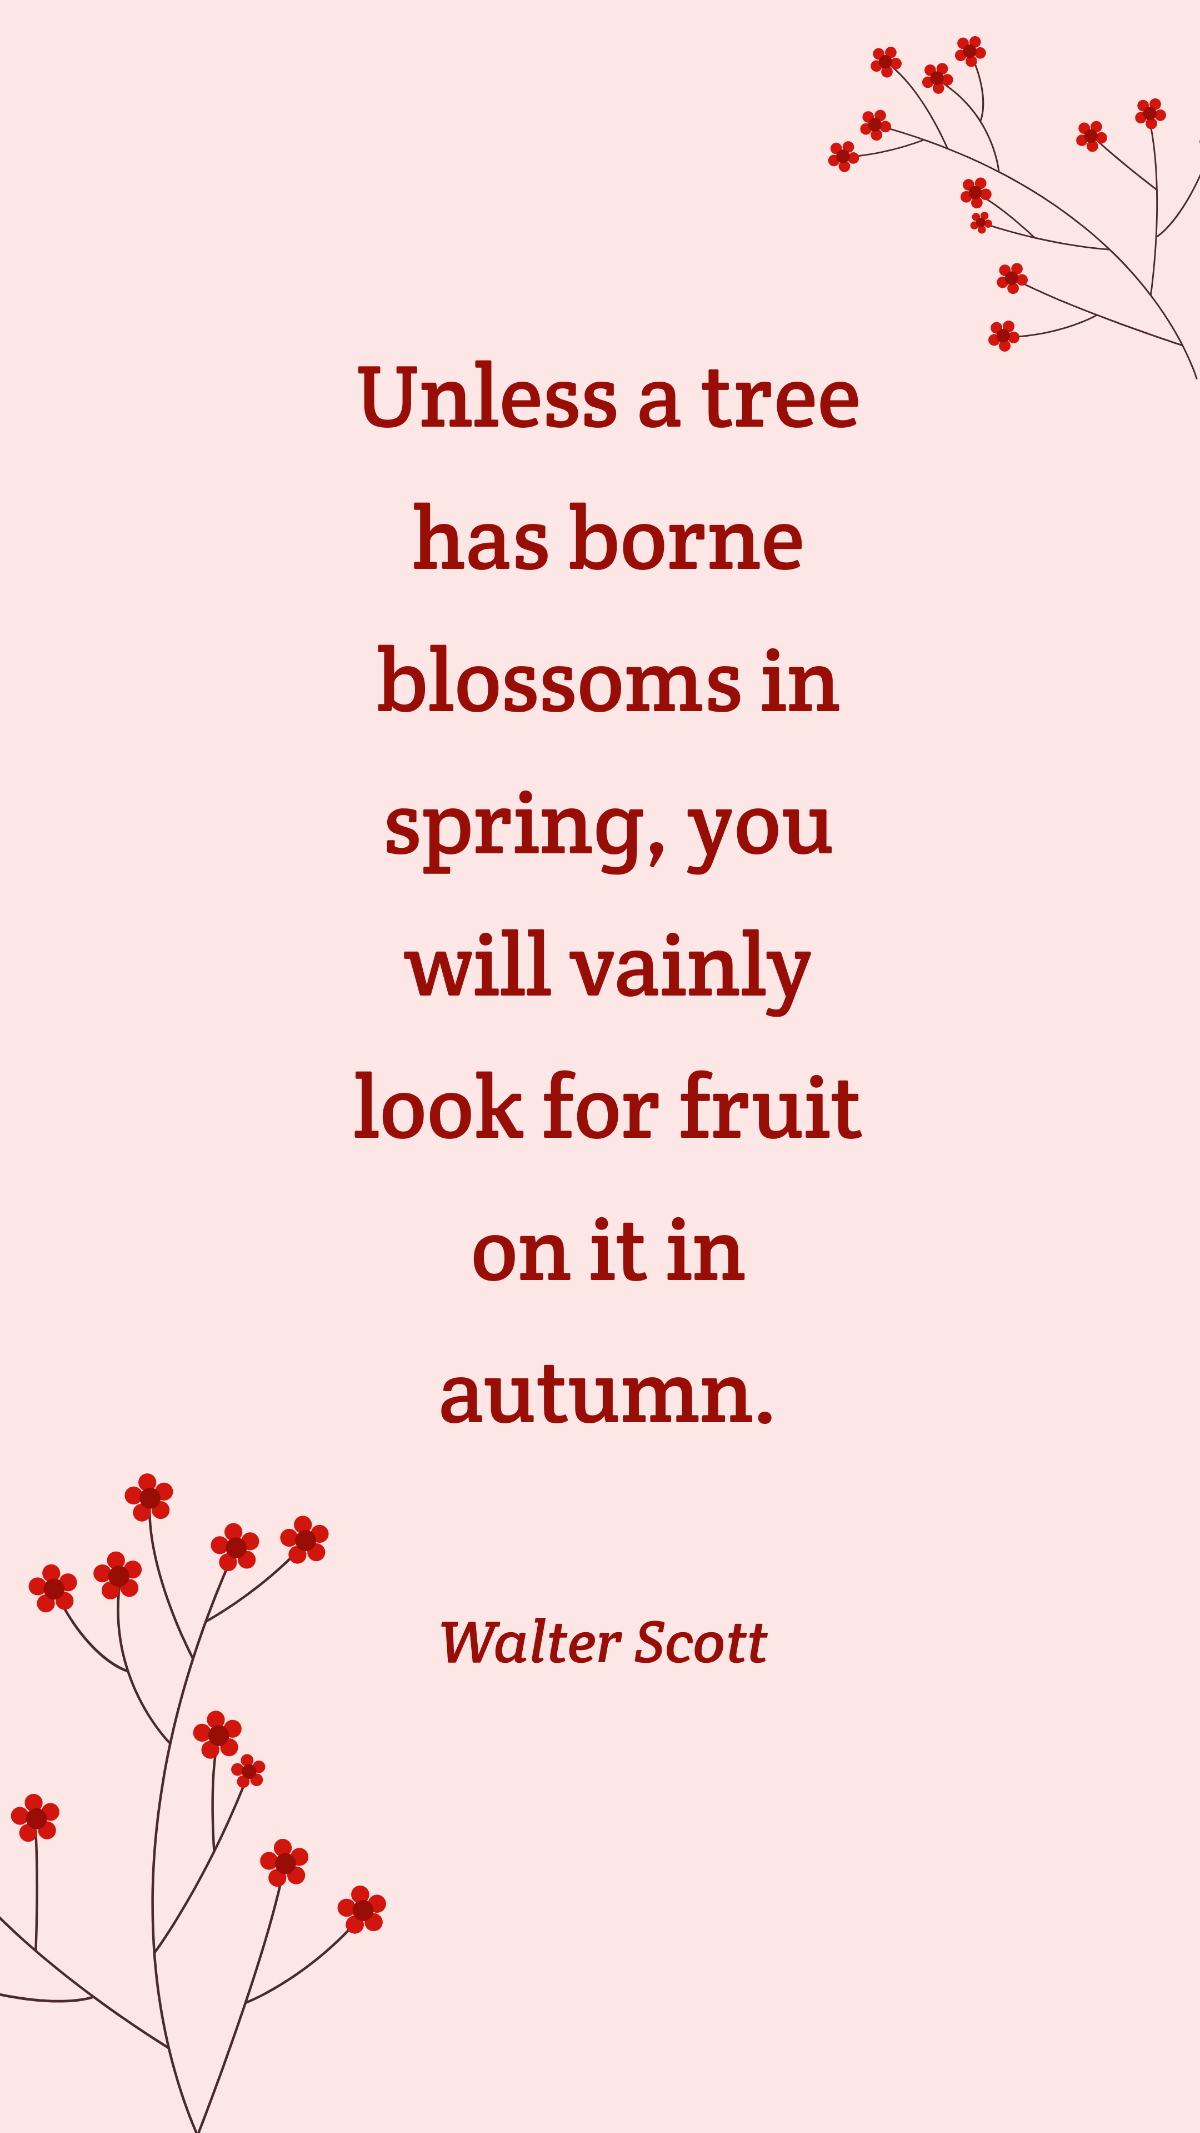 Free  Walter Scott - Unless a tree has borne blossoms in spring, you will vainly look for fruit on it in autumn. Template